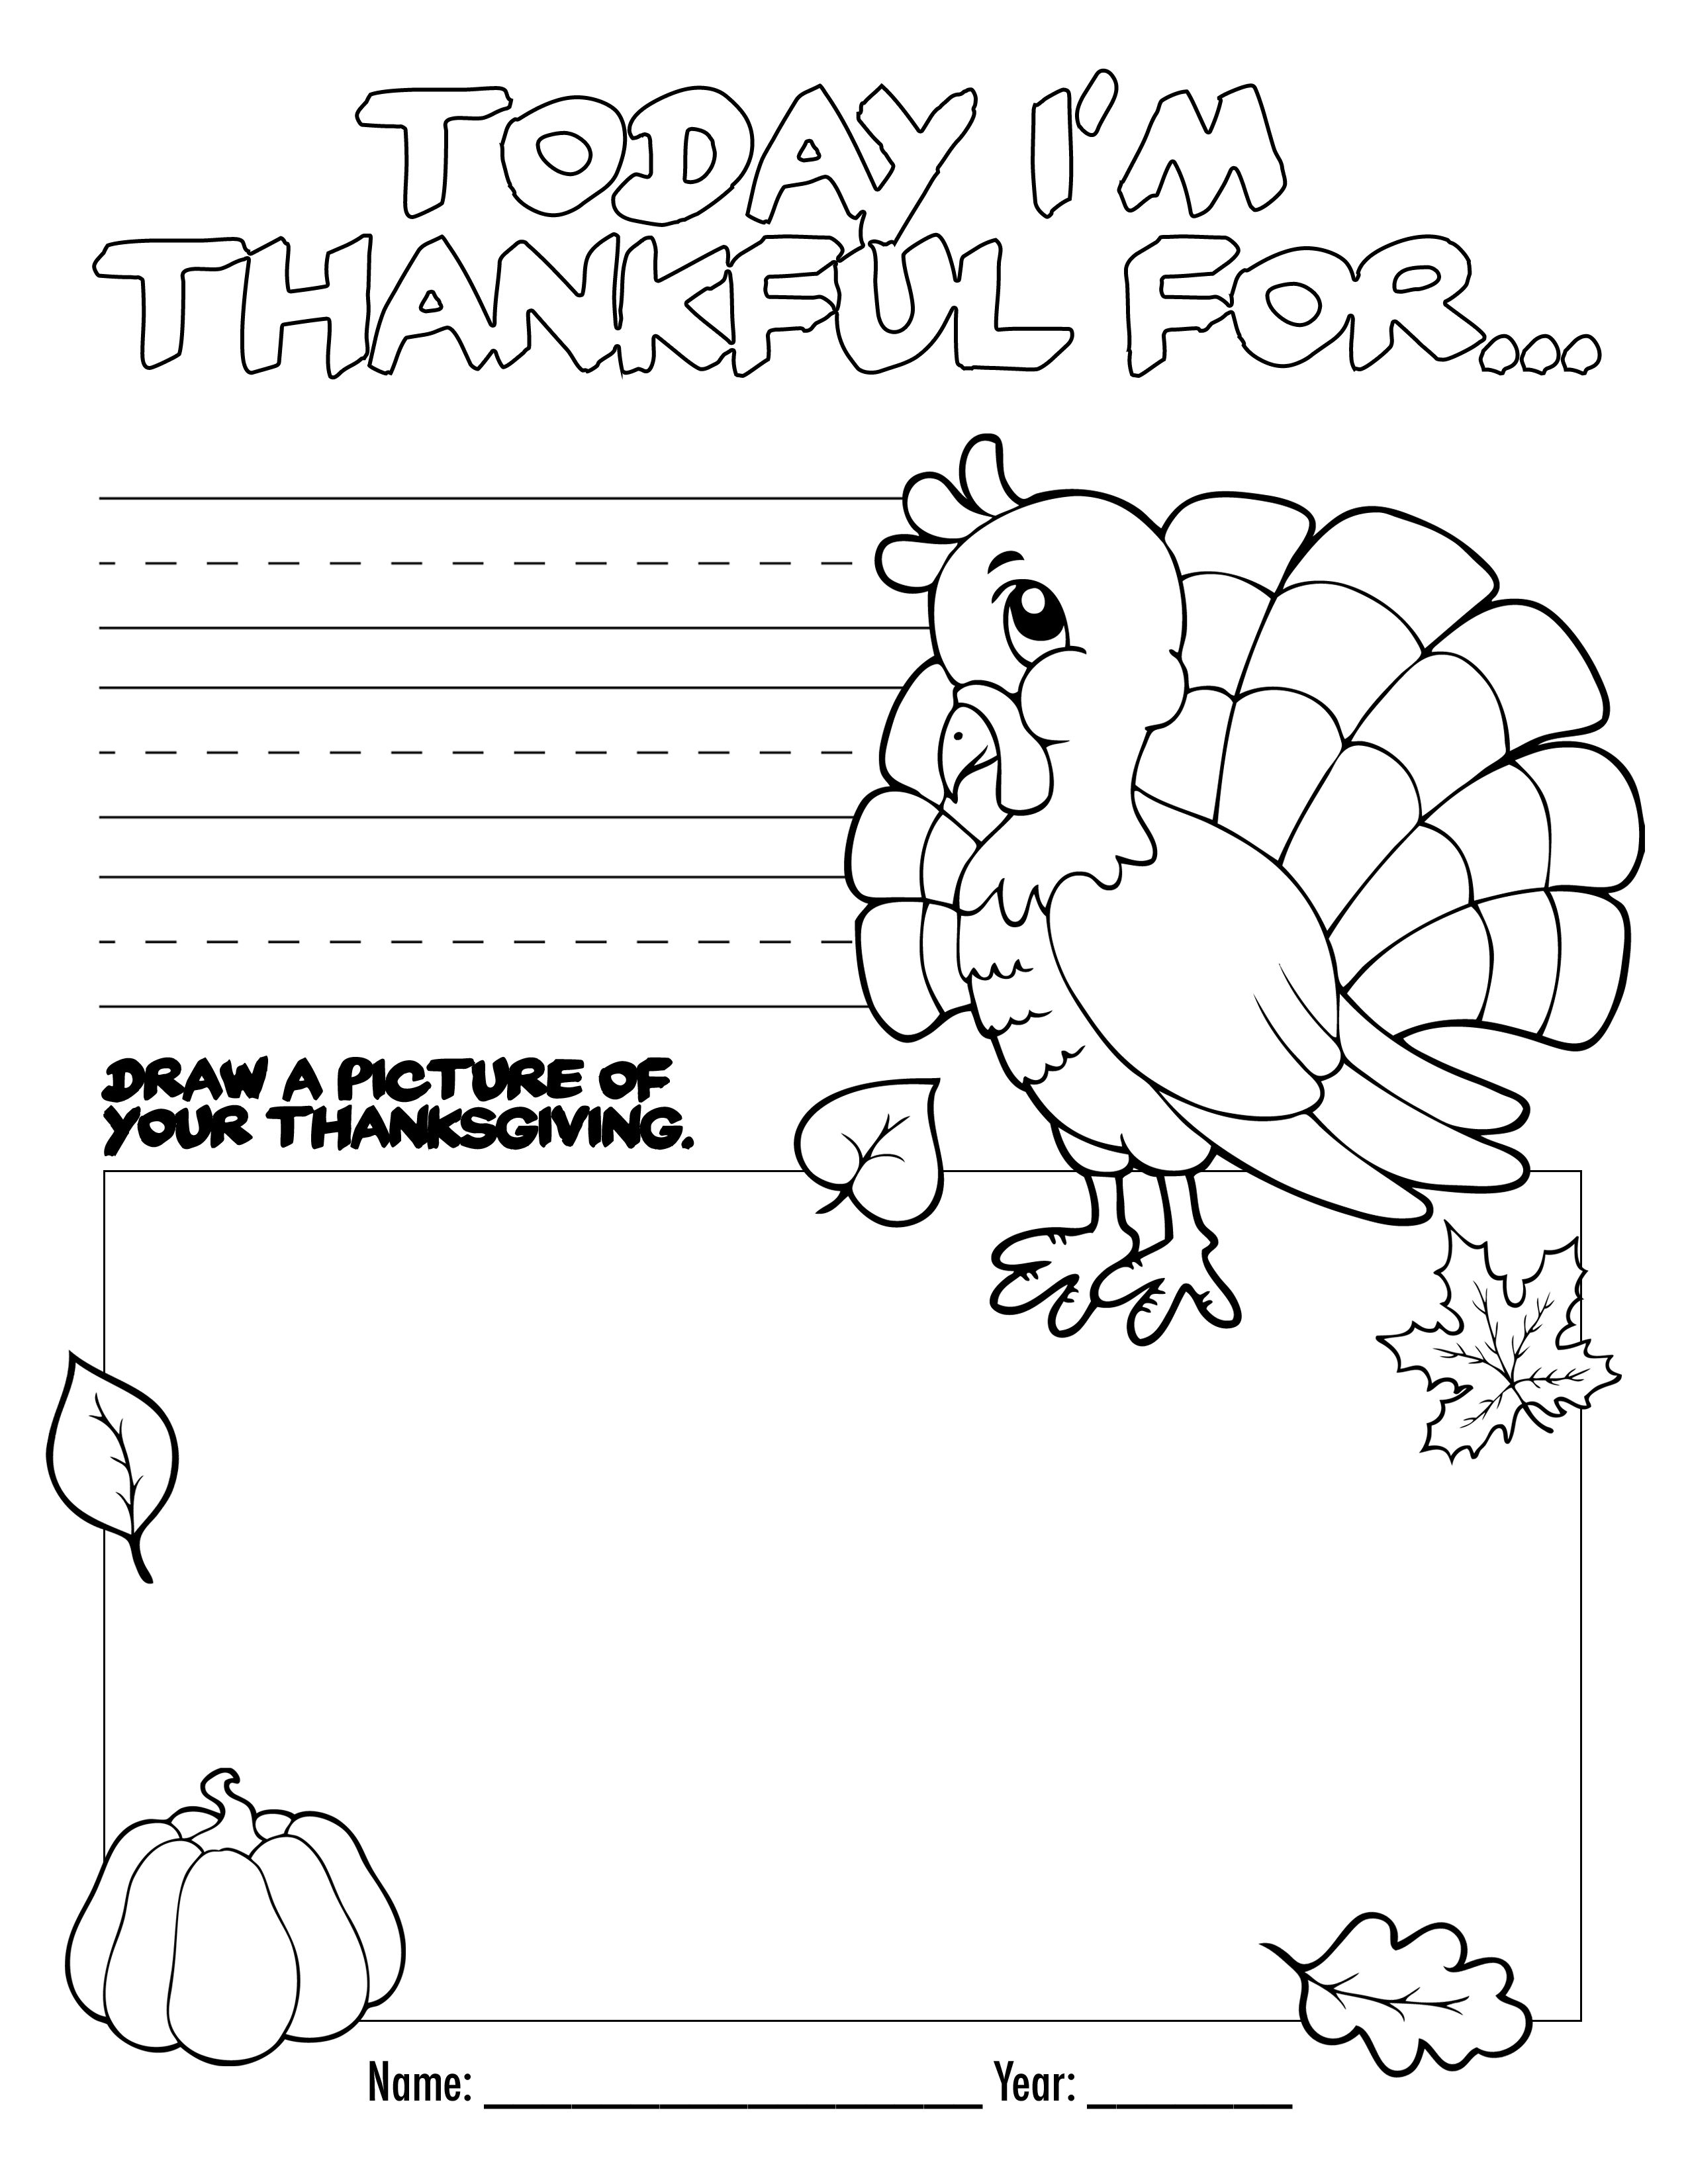 Thanksgiving Coloring Book Free Printable For The Kids! | Bloggers - Free Printable Kindergarten Thanksgiving Activities